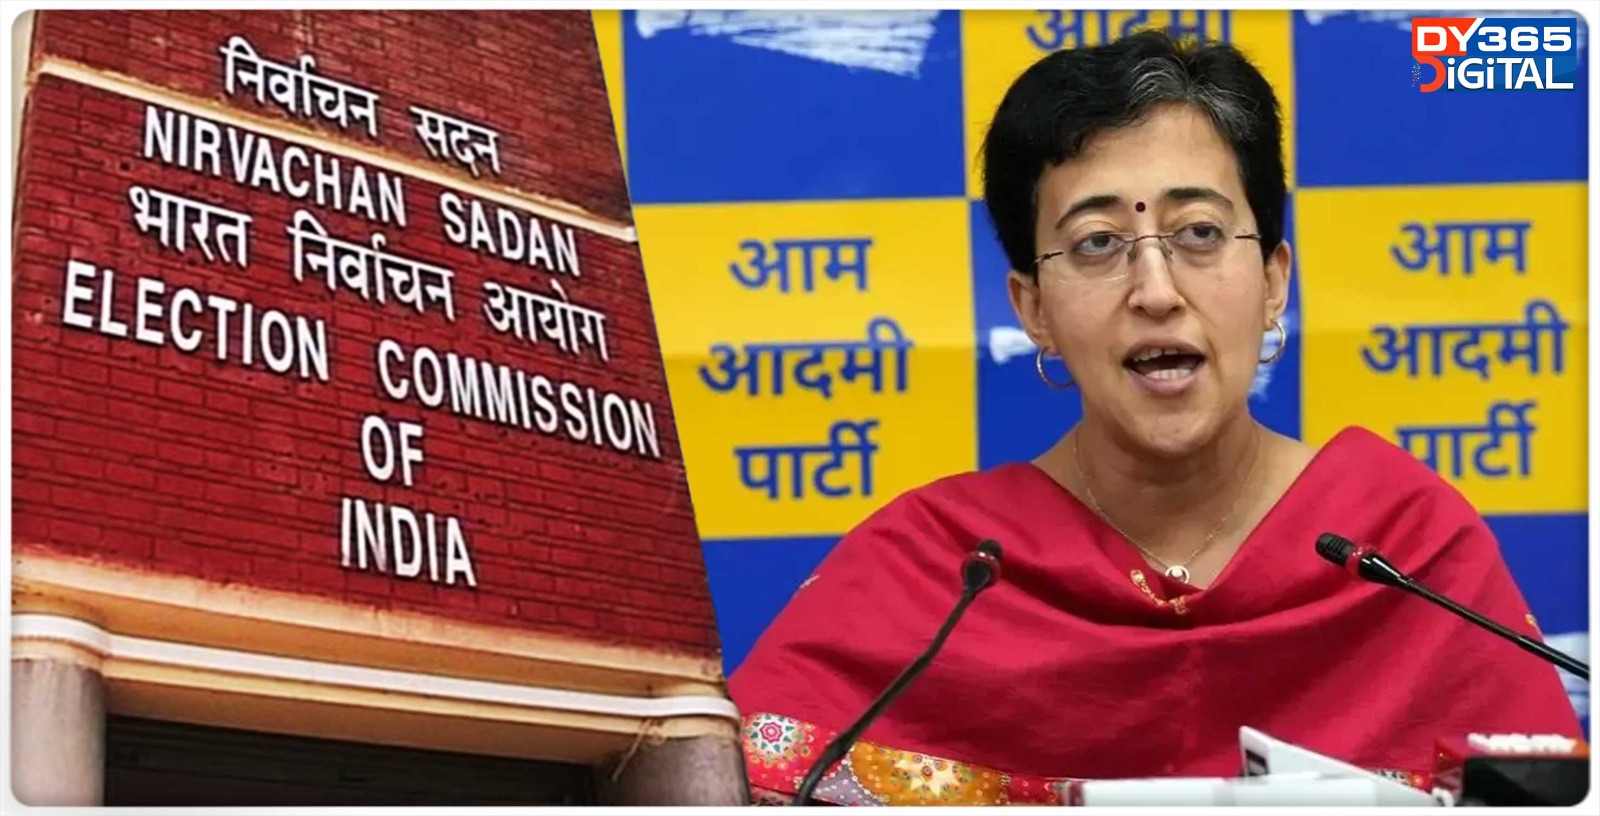 ec-sends-notice-to-aap-leader-atishi-over-her-join-bjp-or-face-arrest-charge